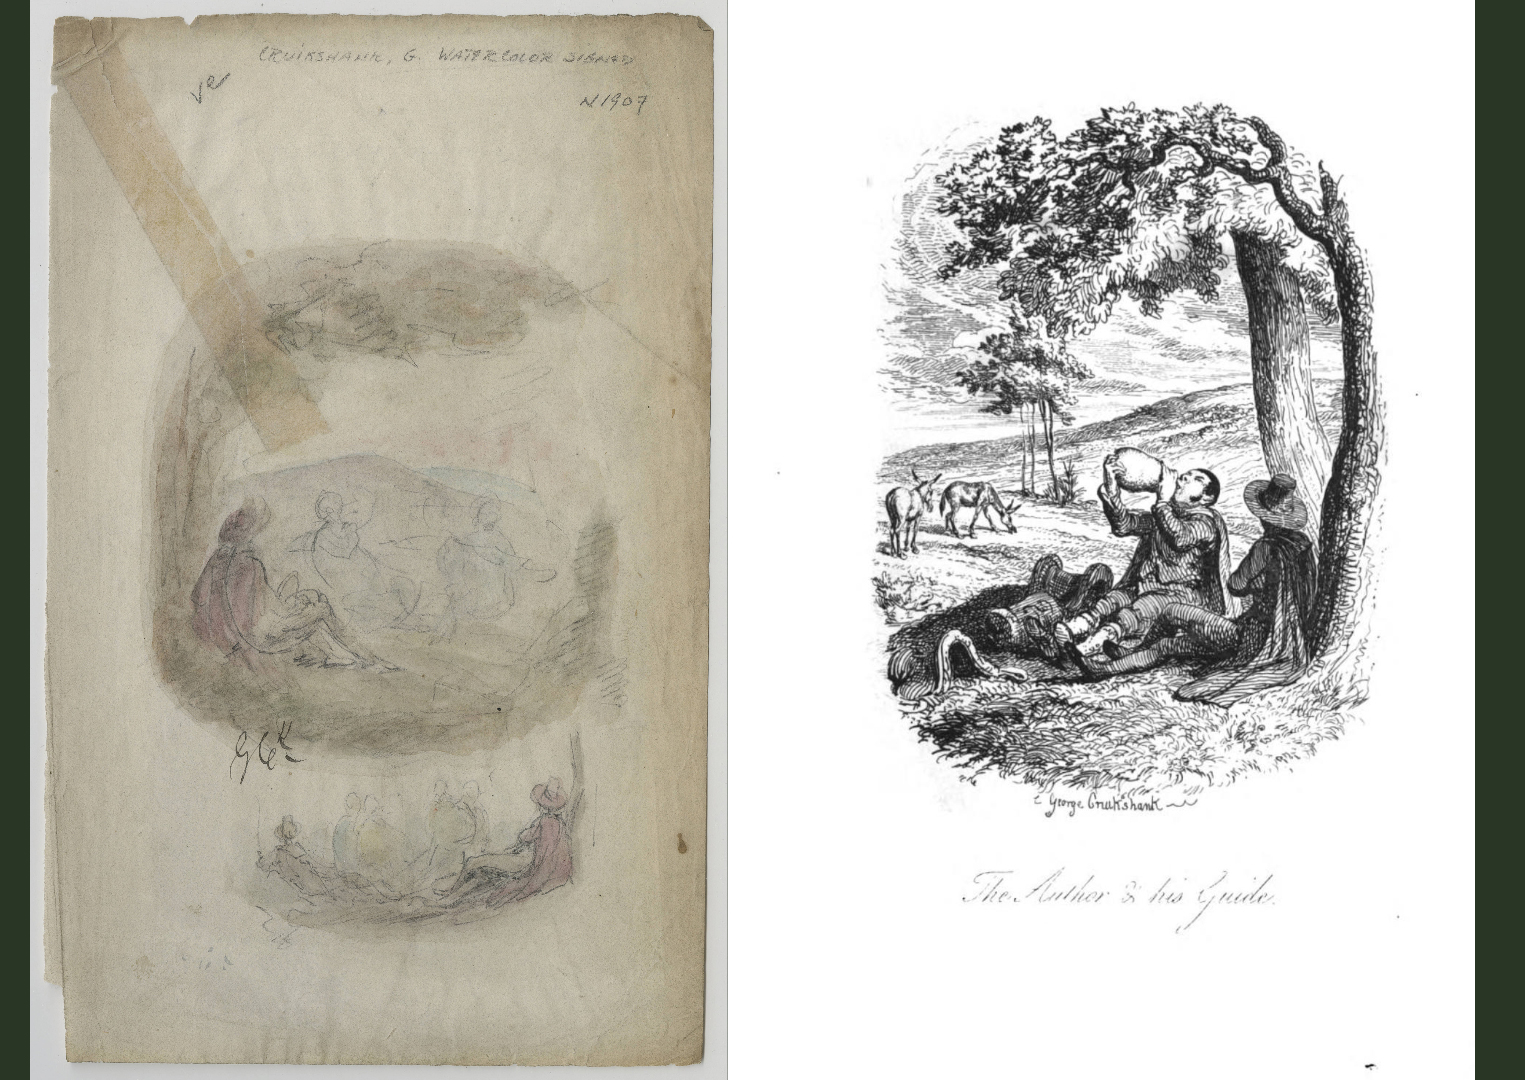 Two images show the same thing, one in watercolor and the other as an etching. A man drinks from a water jug while another man in a hat leans next to a tree. 